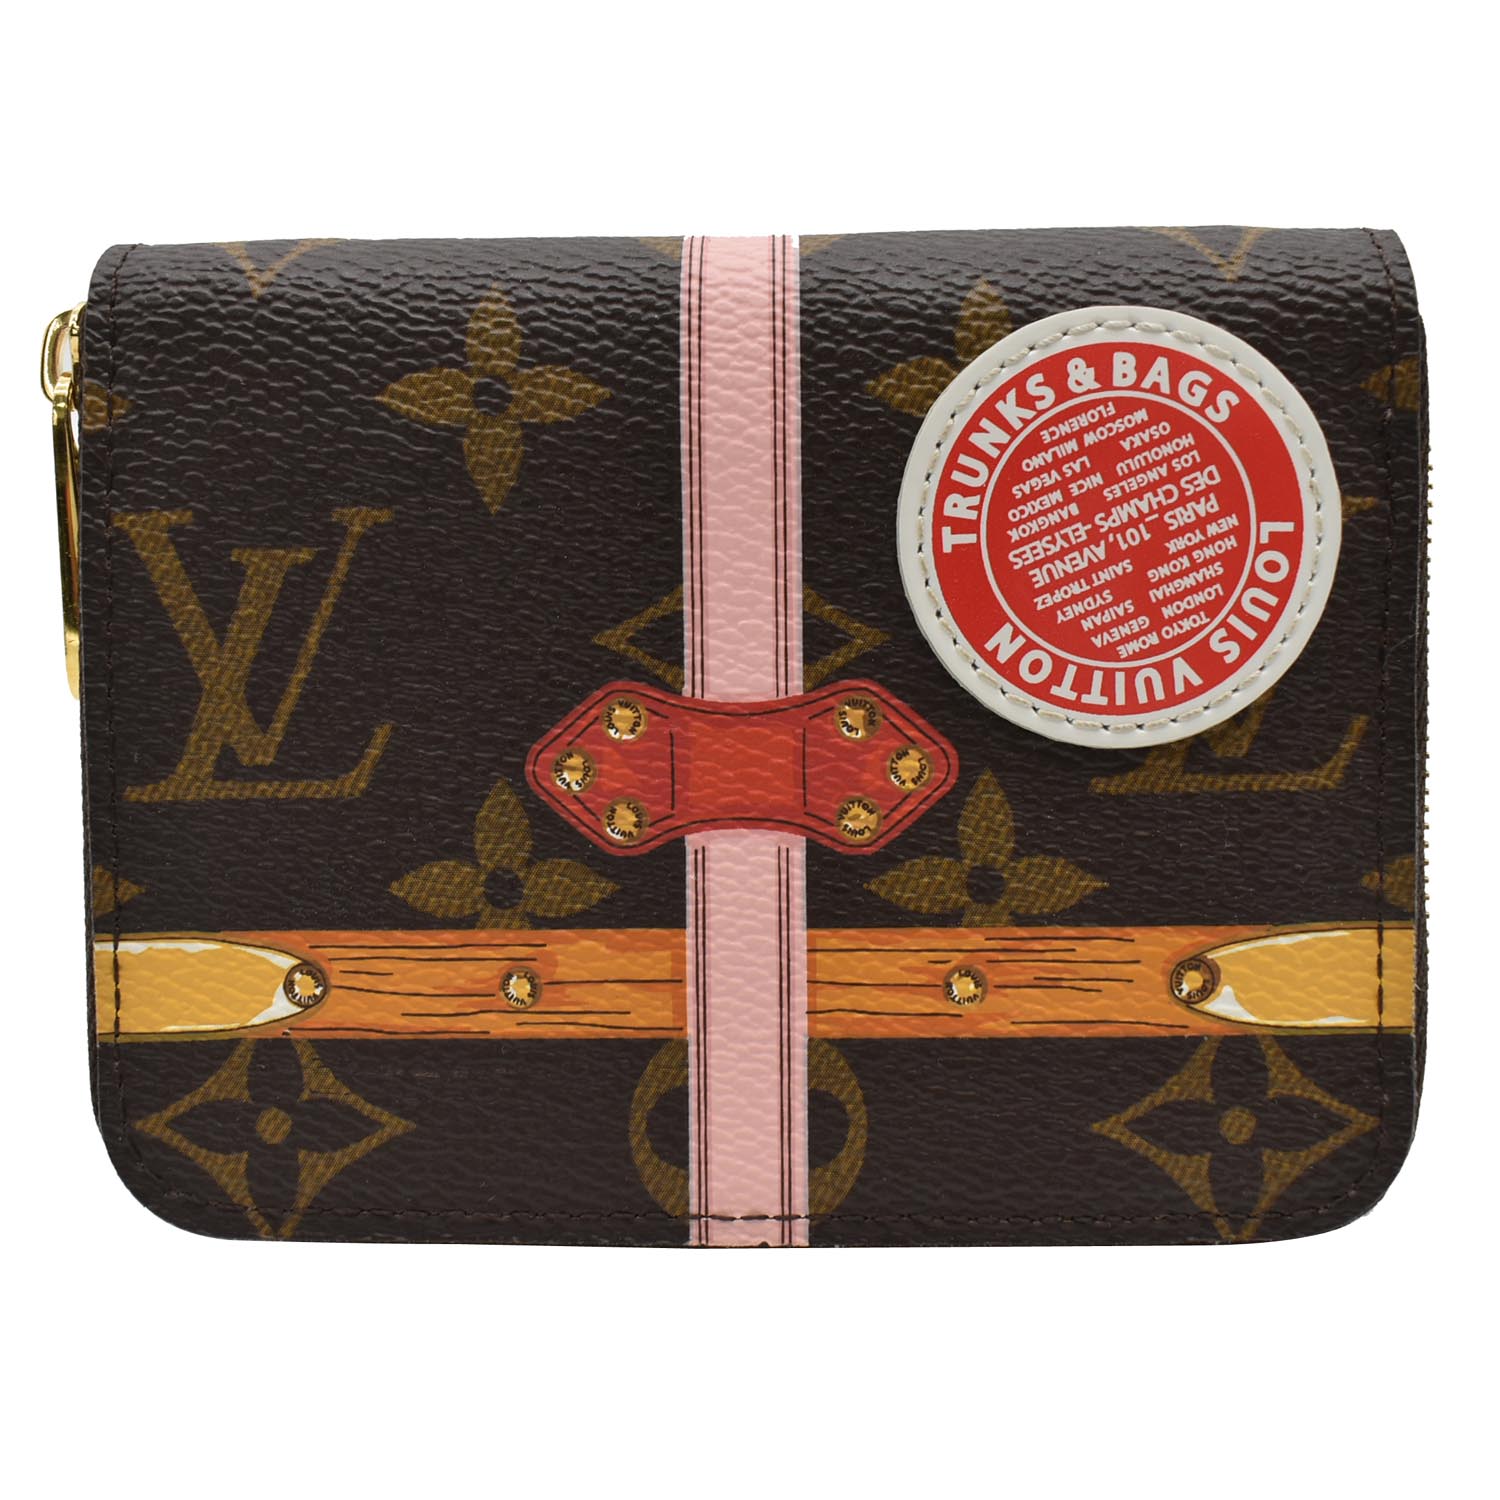 Zippy Coin Purse Monogram Canvas - Wallets and Small Leather Goods